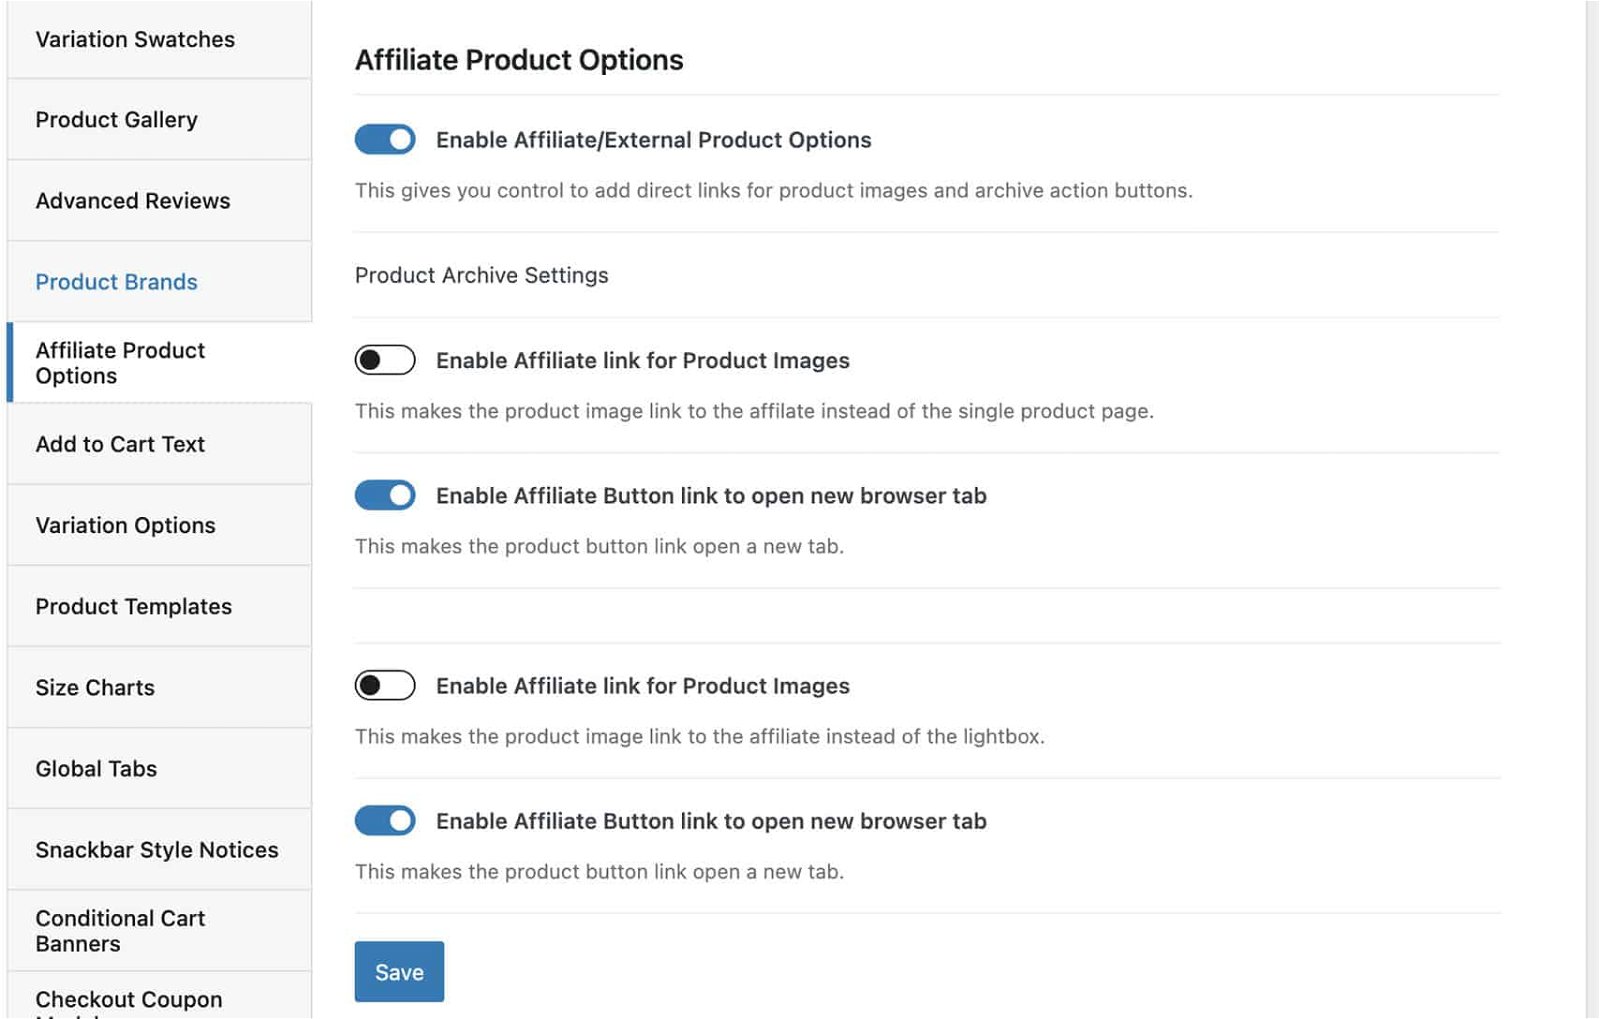 Affiliate Product Options